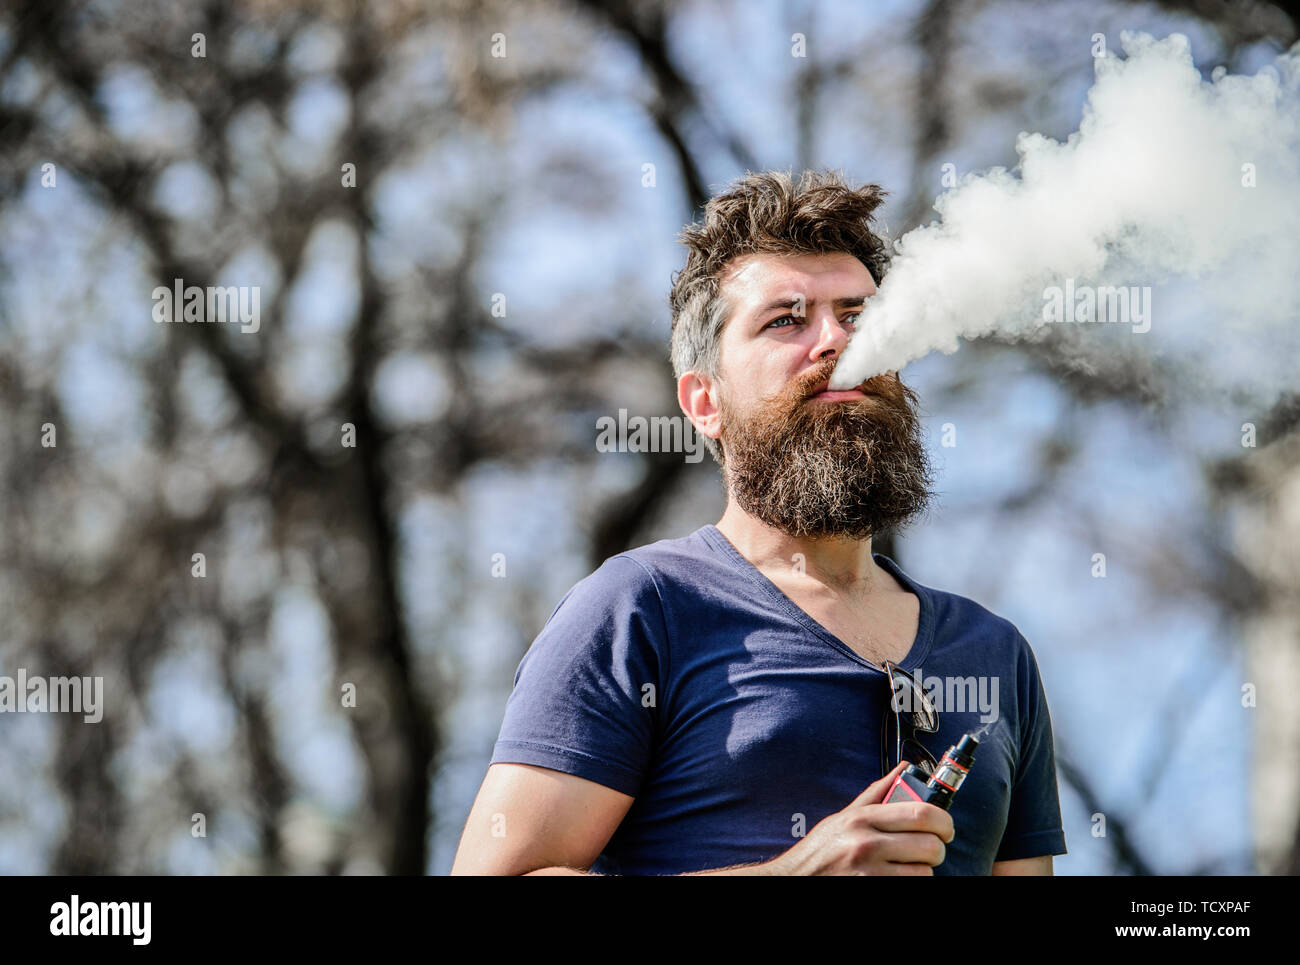 Stress relief concept. Bearded man smoking vape. Smoking electronic  cigarette. Man long beard relaxed with smoking habit. Man with beard and  mustache breathe out smoke. White clouds of flavored smoke Stock Photo -